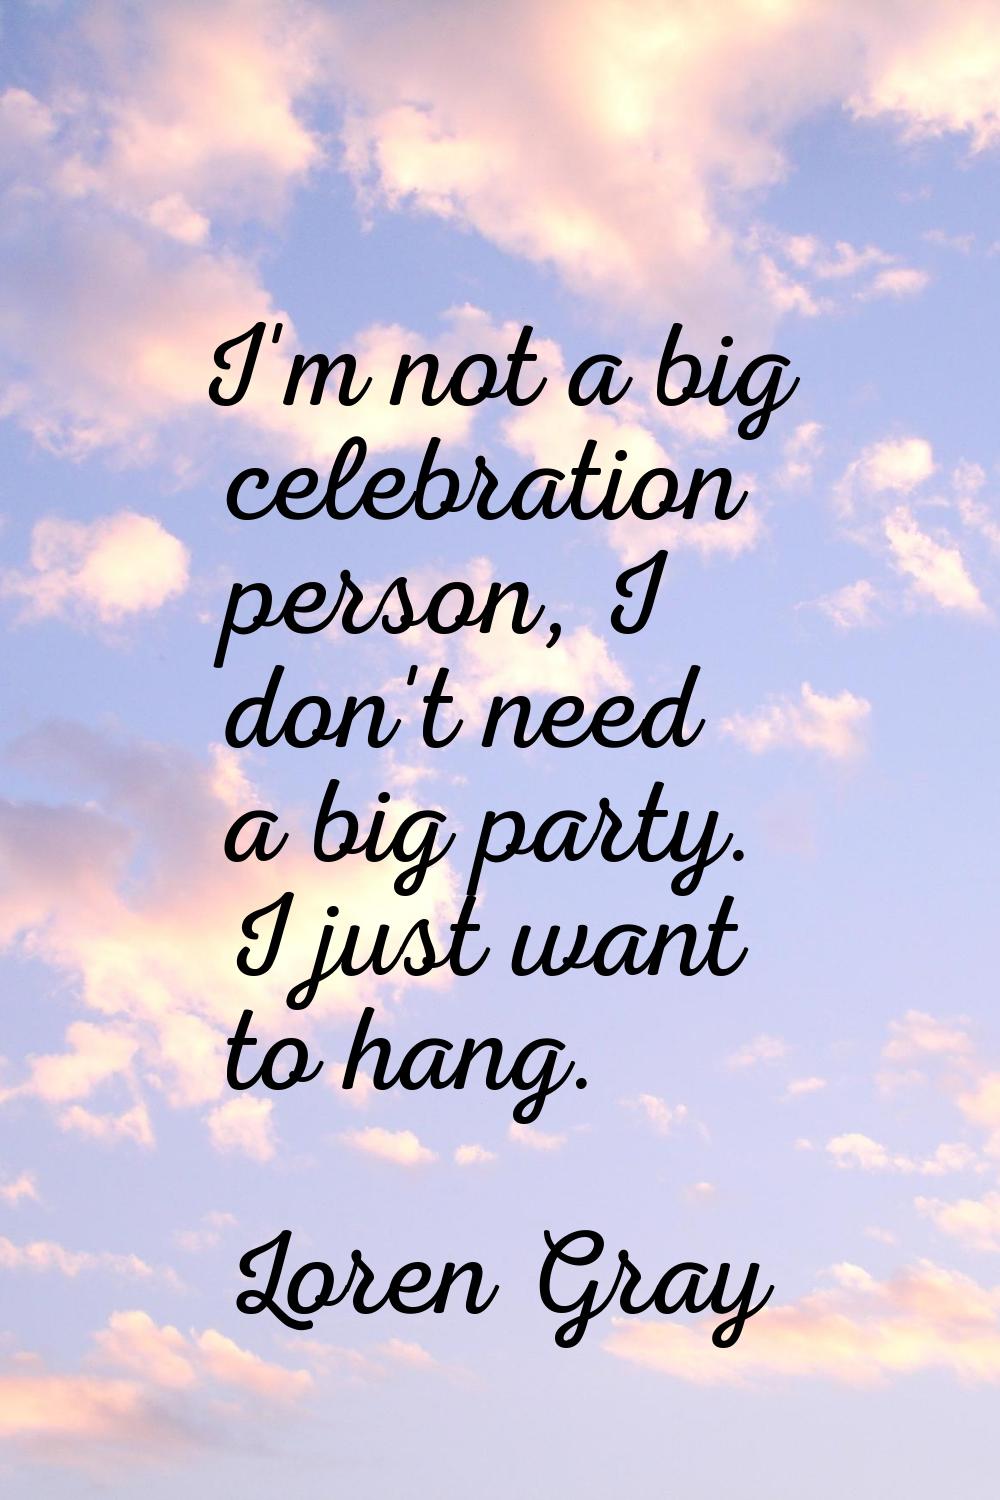 I'm not a big celebration person, I don't need a big party. I just want to hang.